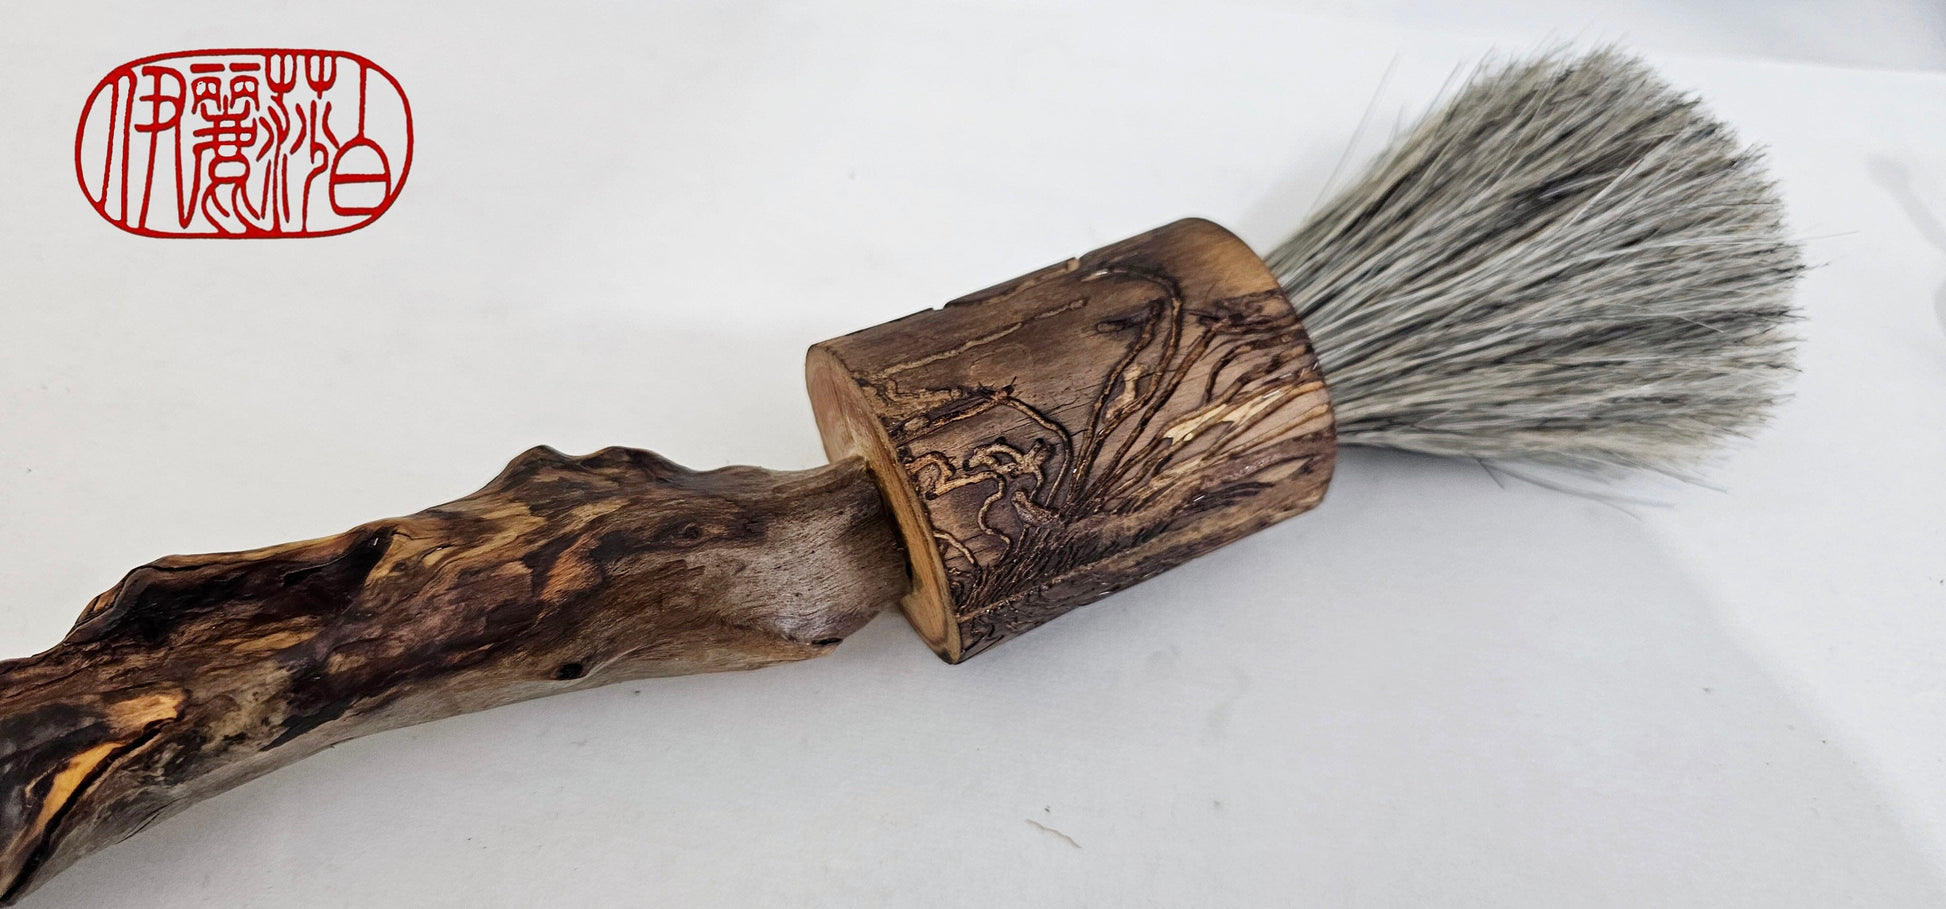 Handcrafted Sumi-e Style Painter's Brush with Driftwood Handle and Horsehair Bristles Sumi-e Paintbrush Elizabeth Schowachert Art